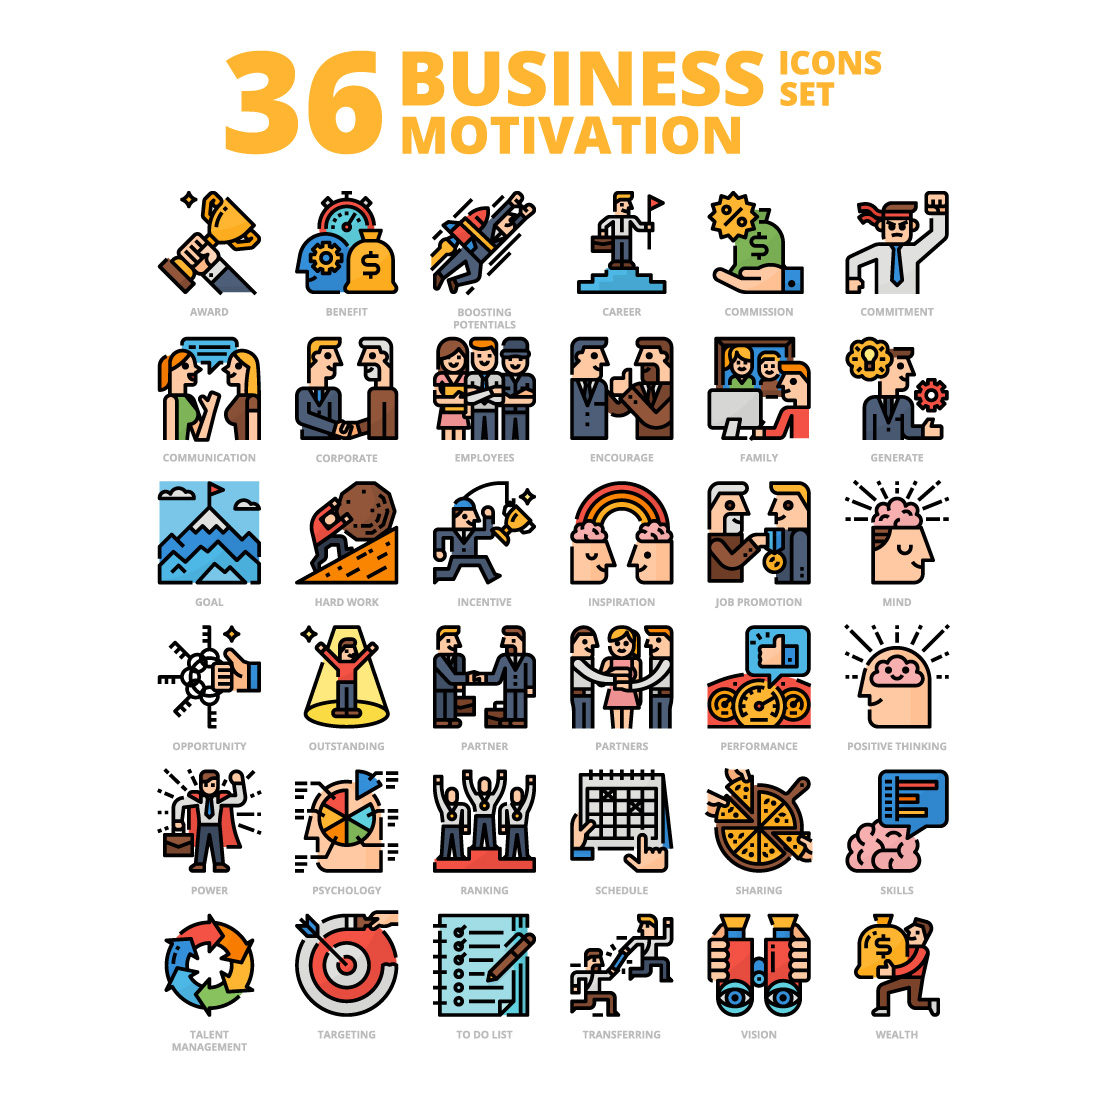 36 Business Motivation Icons Set x 4 Styles cover image.